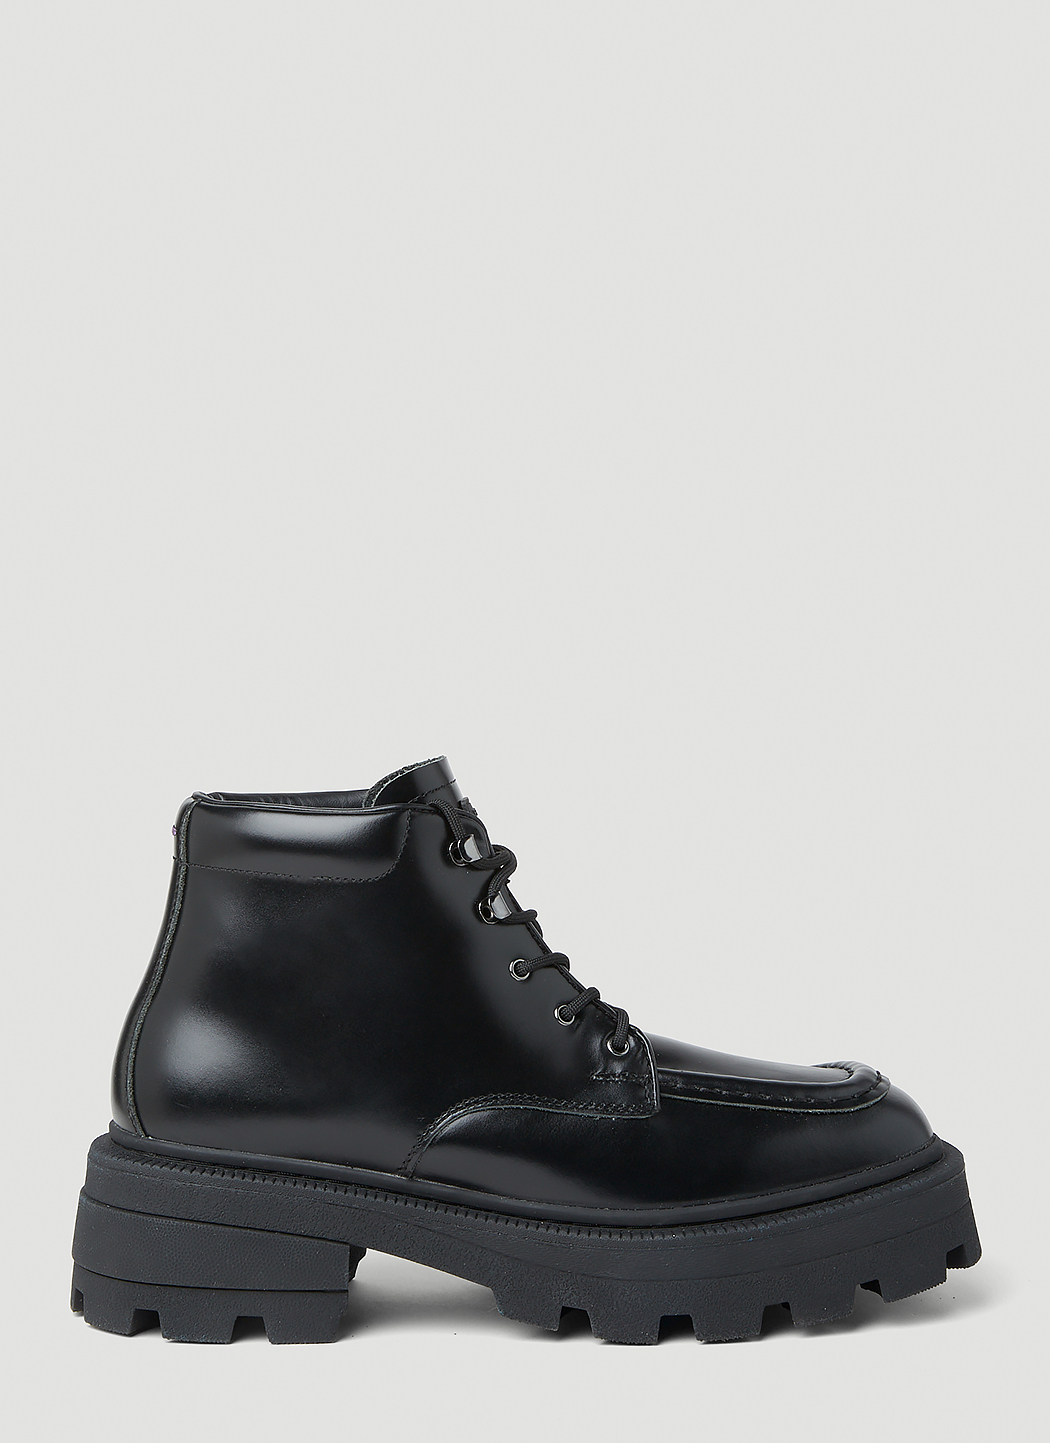 Tribeca Lace Up Boots